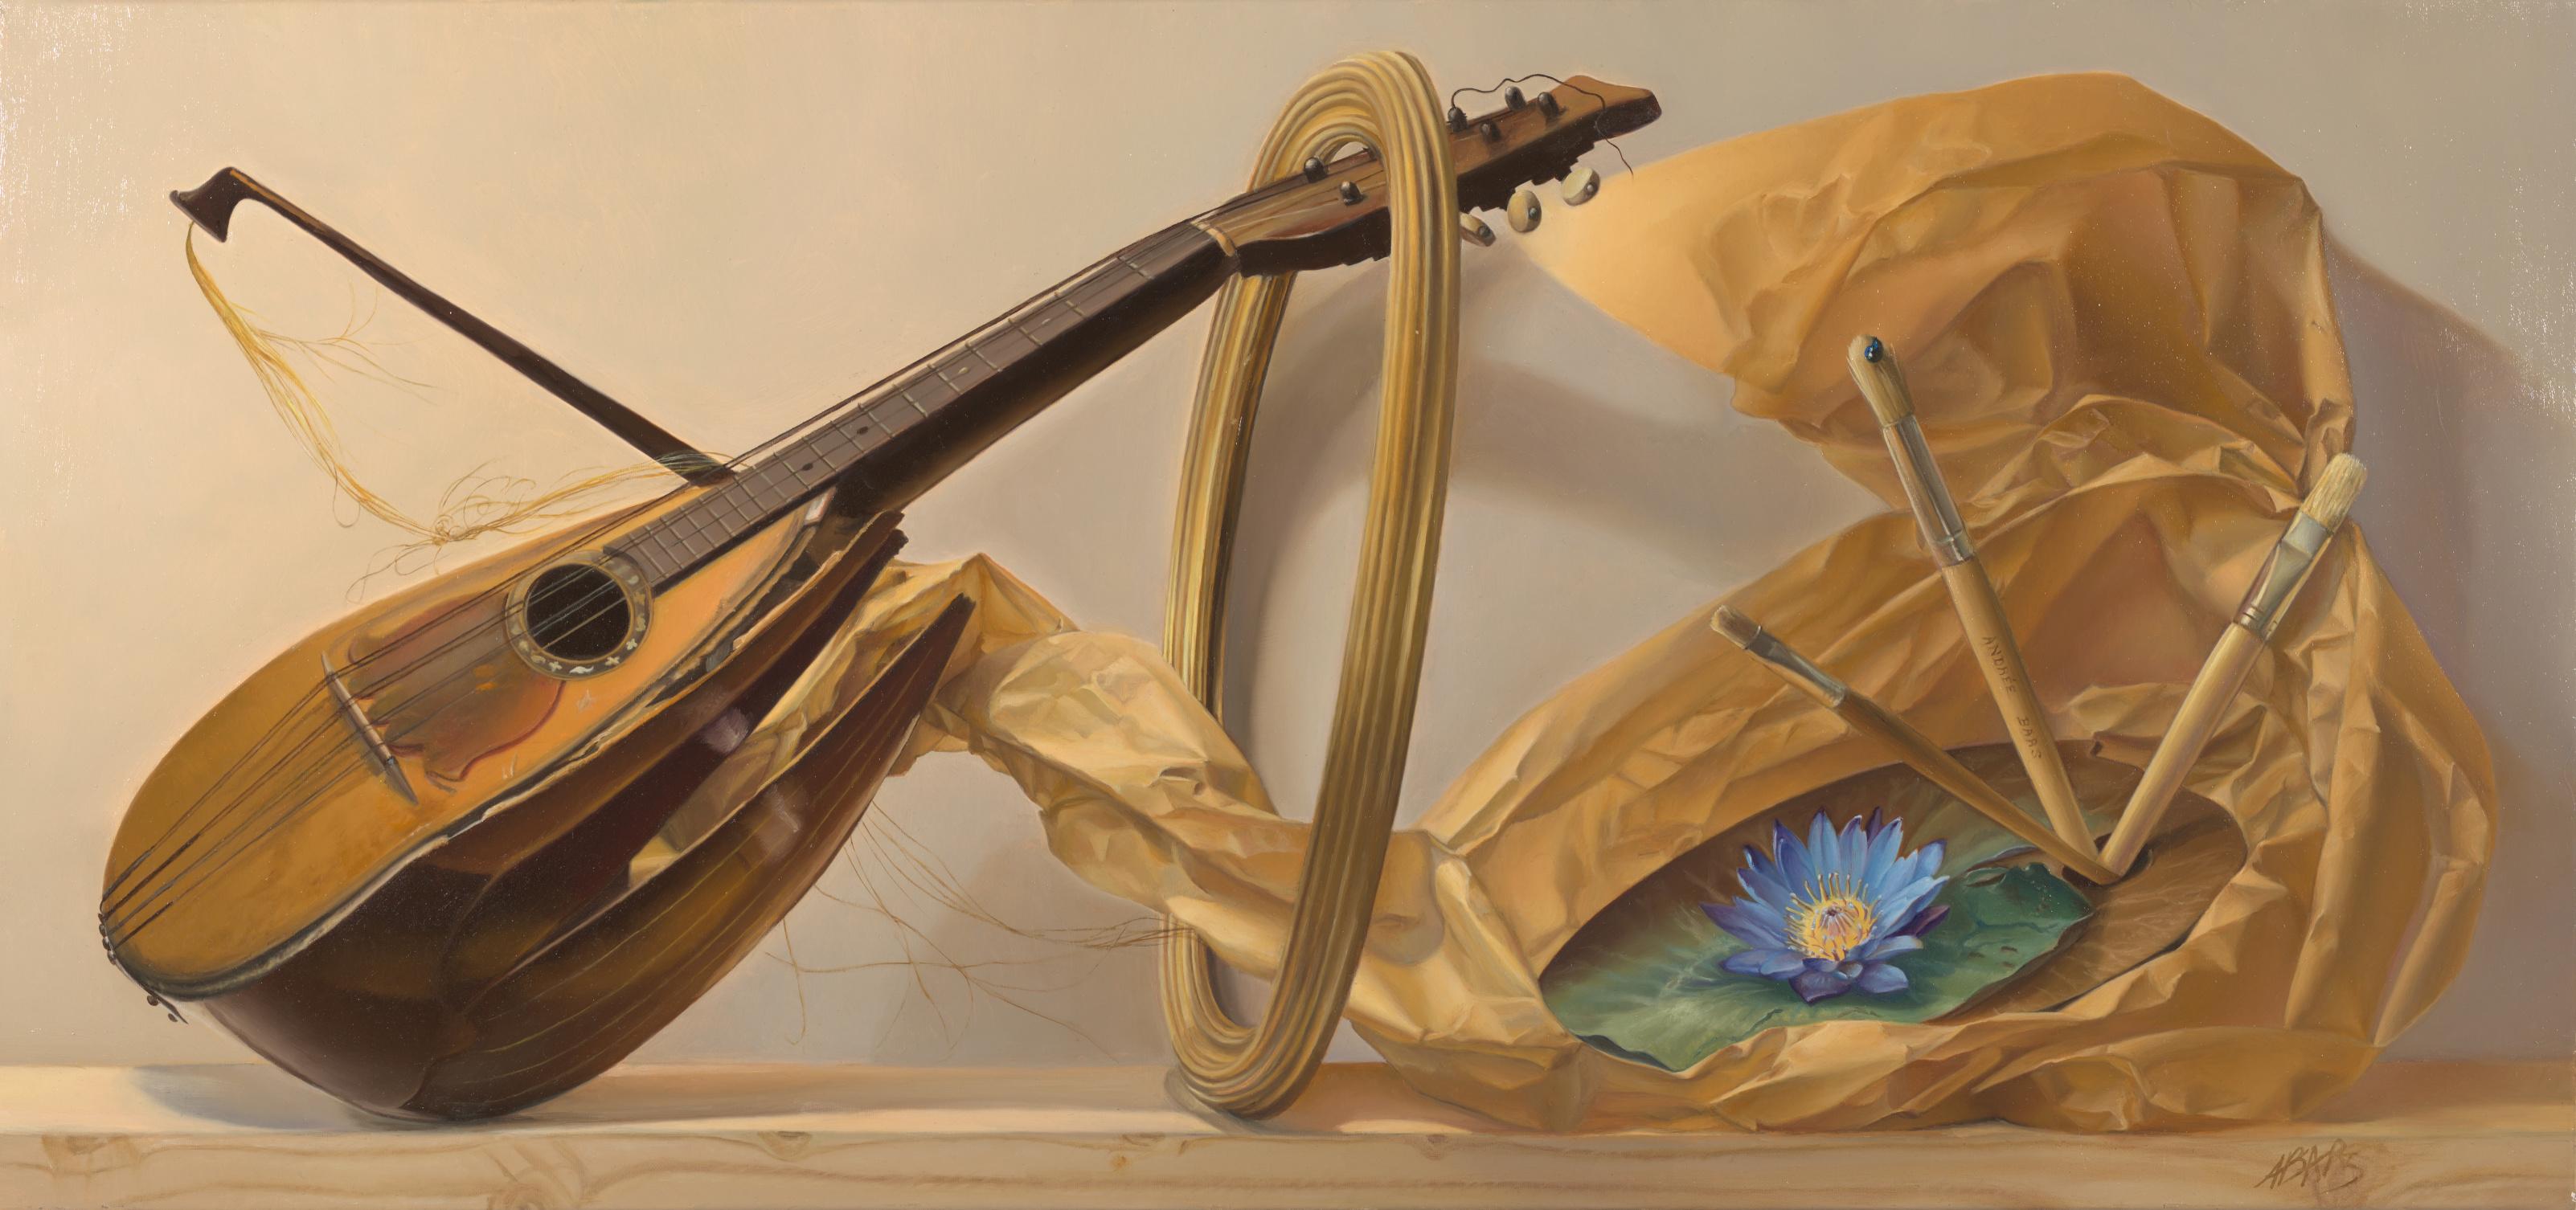 Andrée Bars Figurative Painting - "the Painter's Eye",  Violin, Blue Flower and Brush, Symbolist Oil Painting